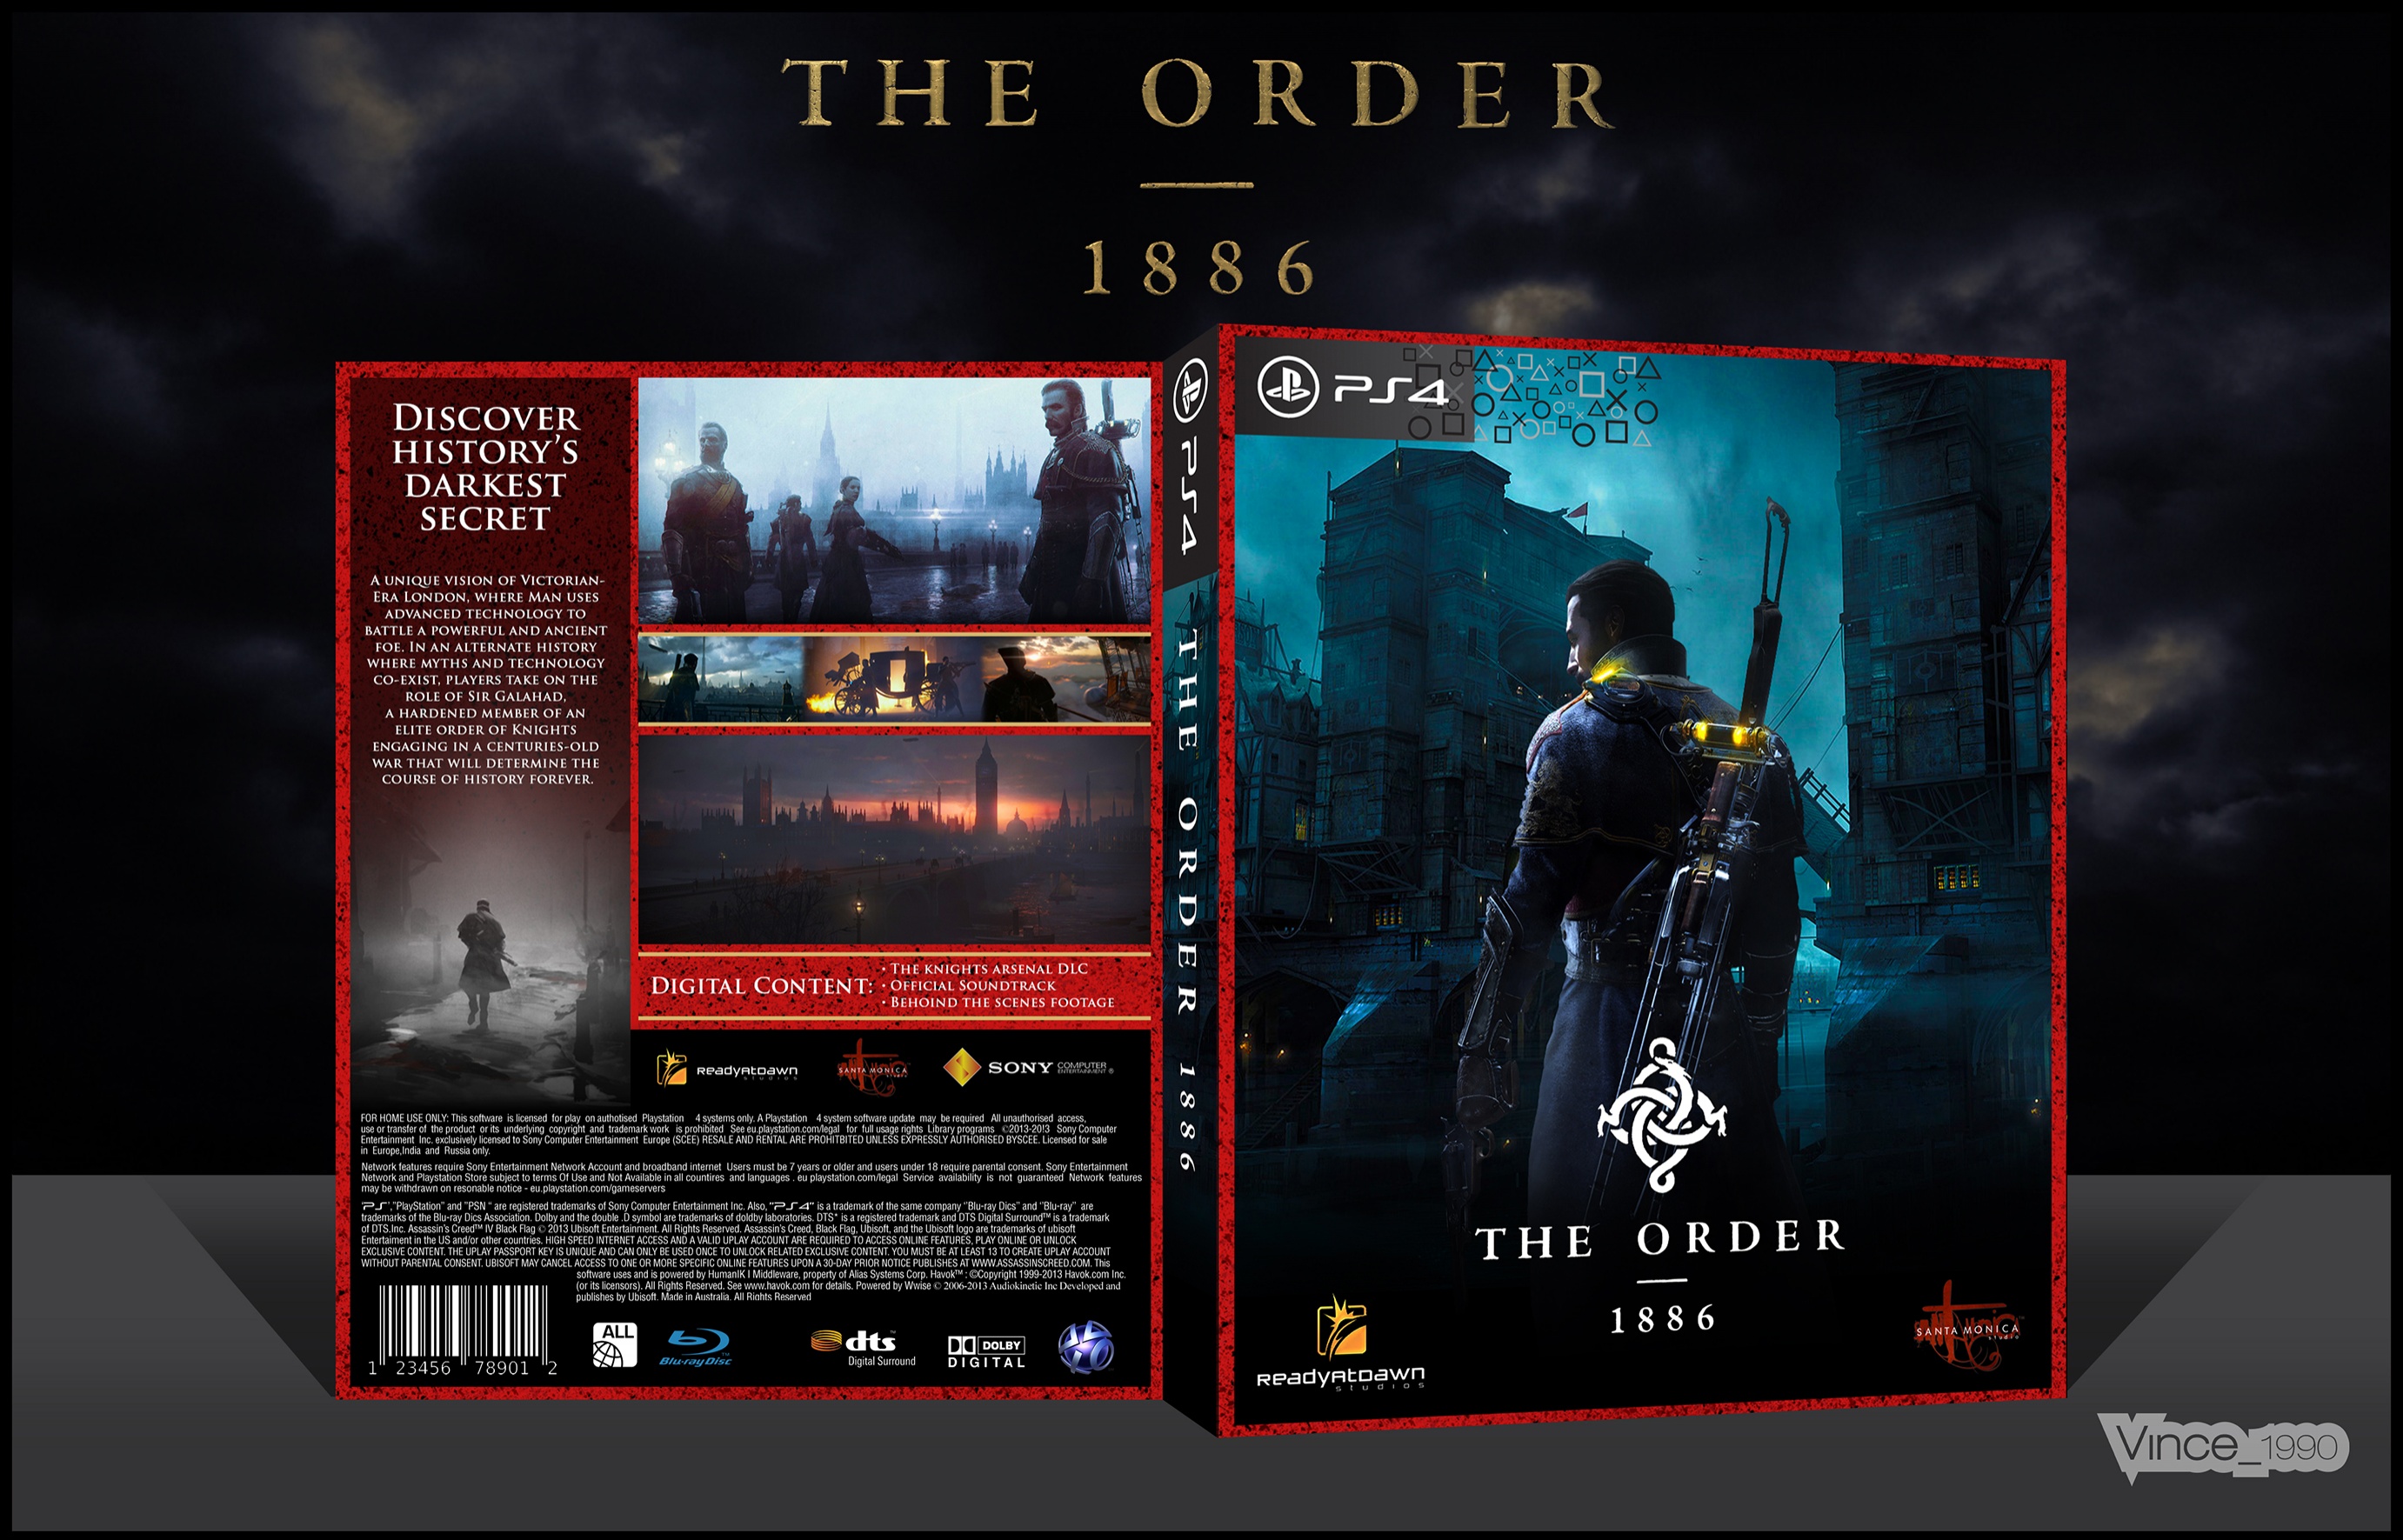 The Order 1886 box cover